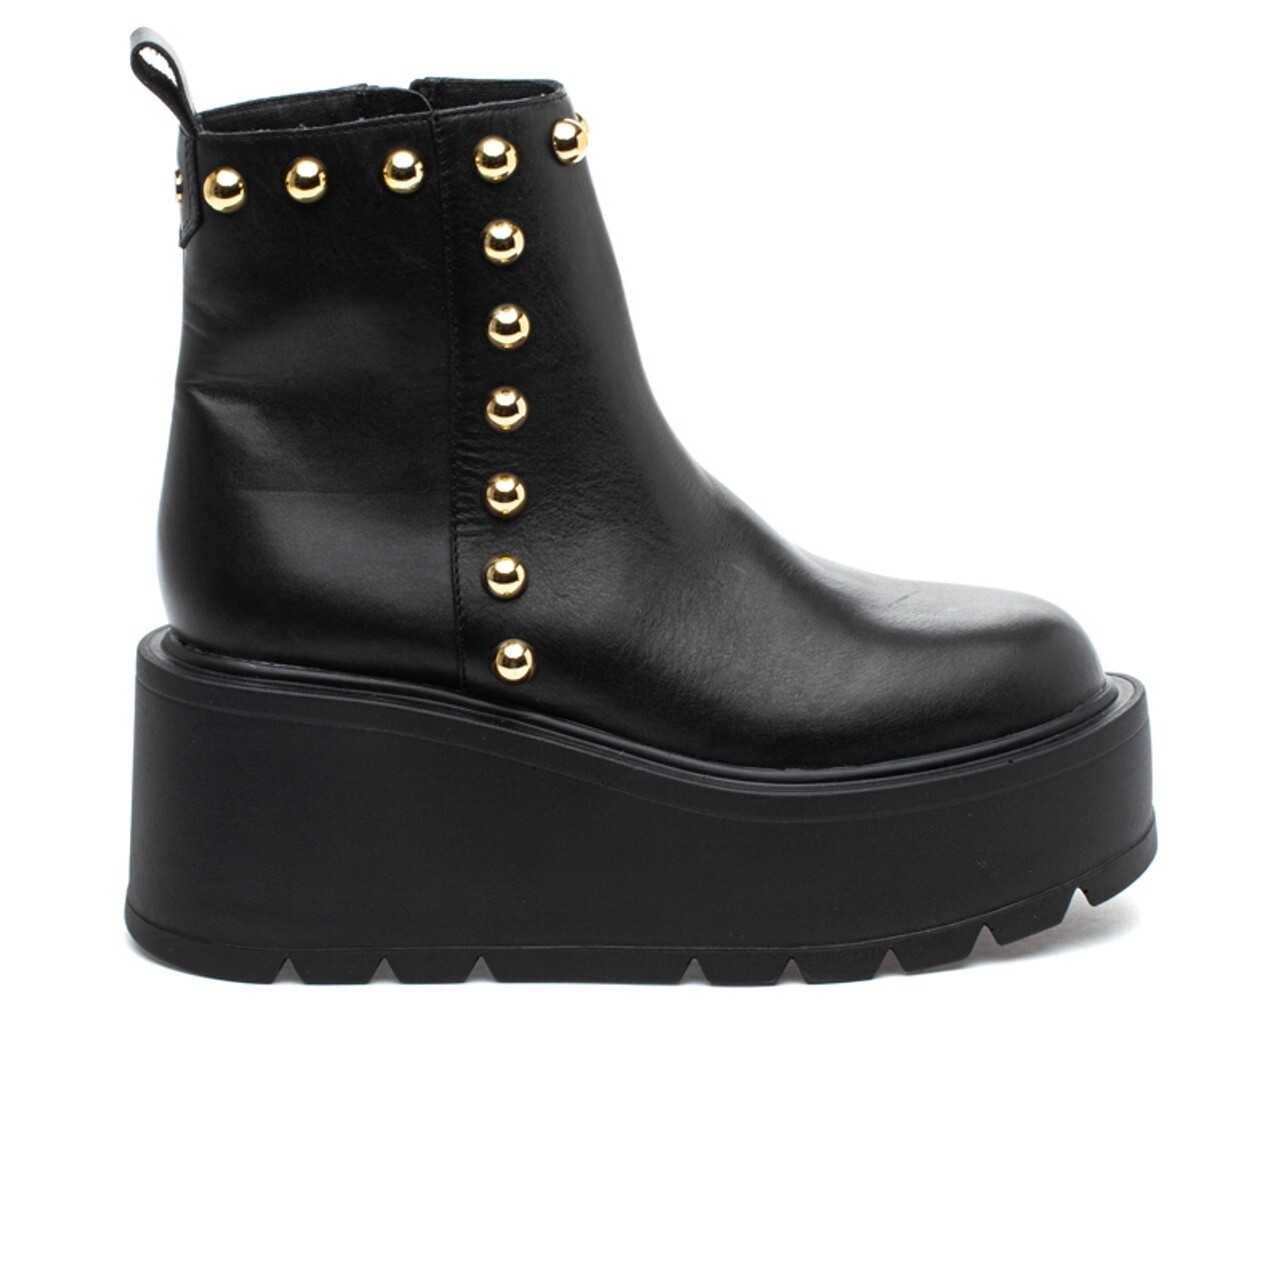 Viceroy Black Leather Boots